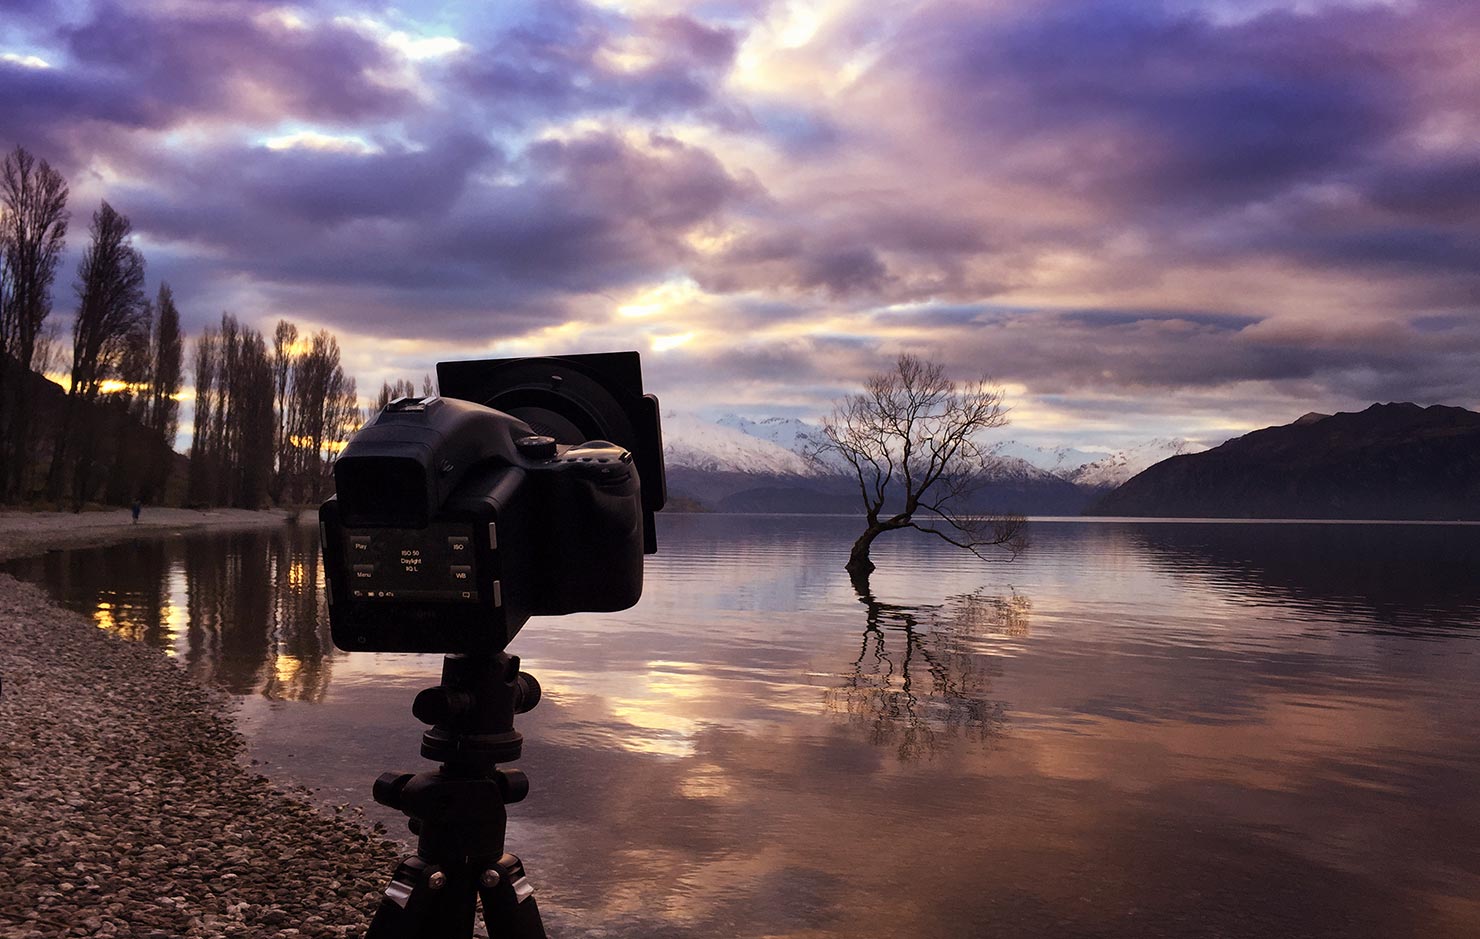 Photographing That Wanaka Tree 2014 New Zealand Paul Reiffer Phase One 645 DF IQ280 Quiet Before The Crowds Lake South Island Ruined